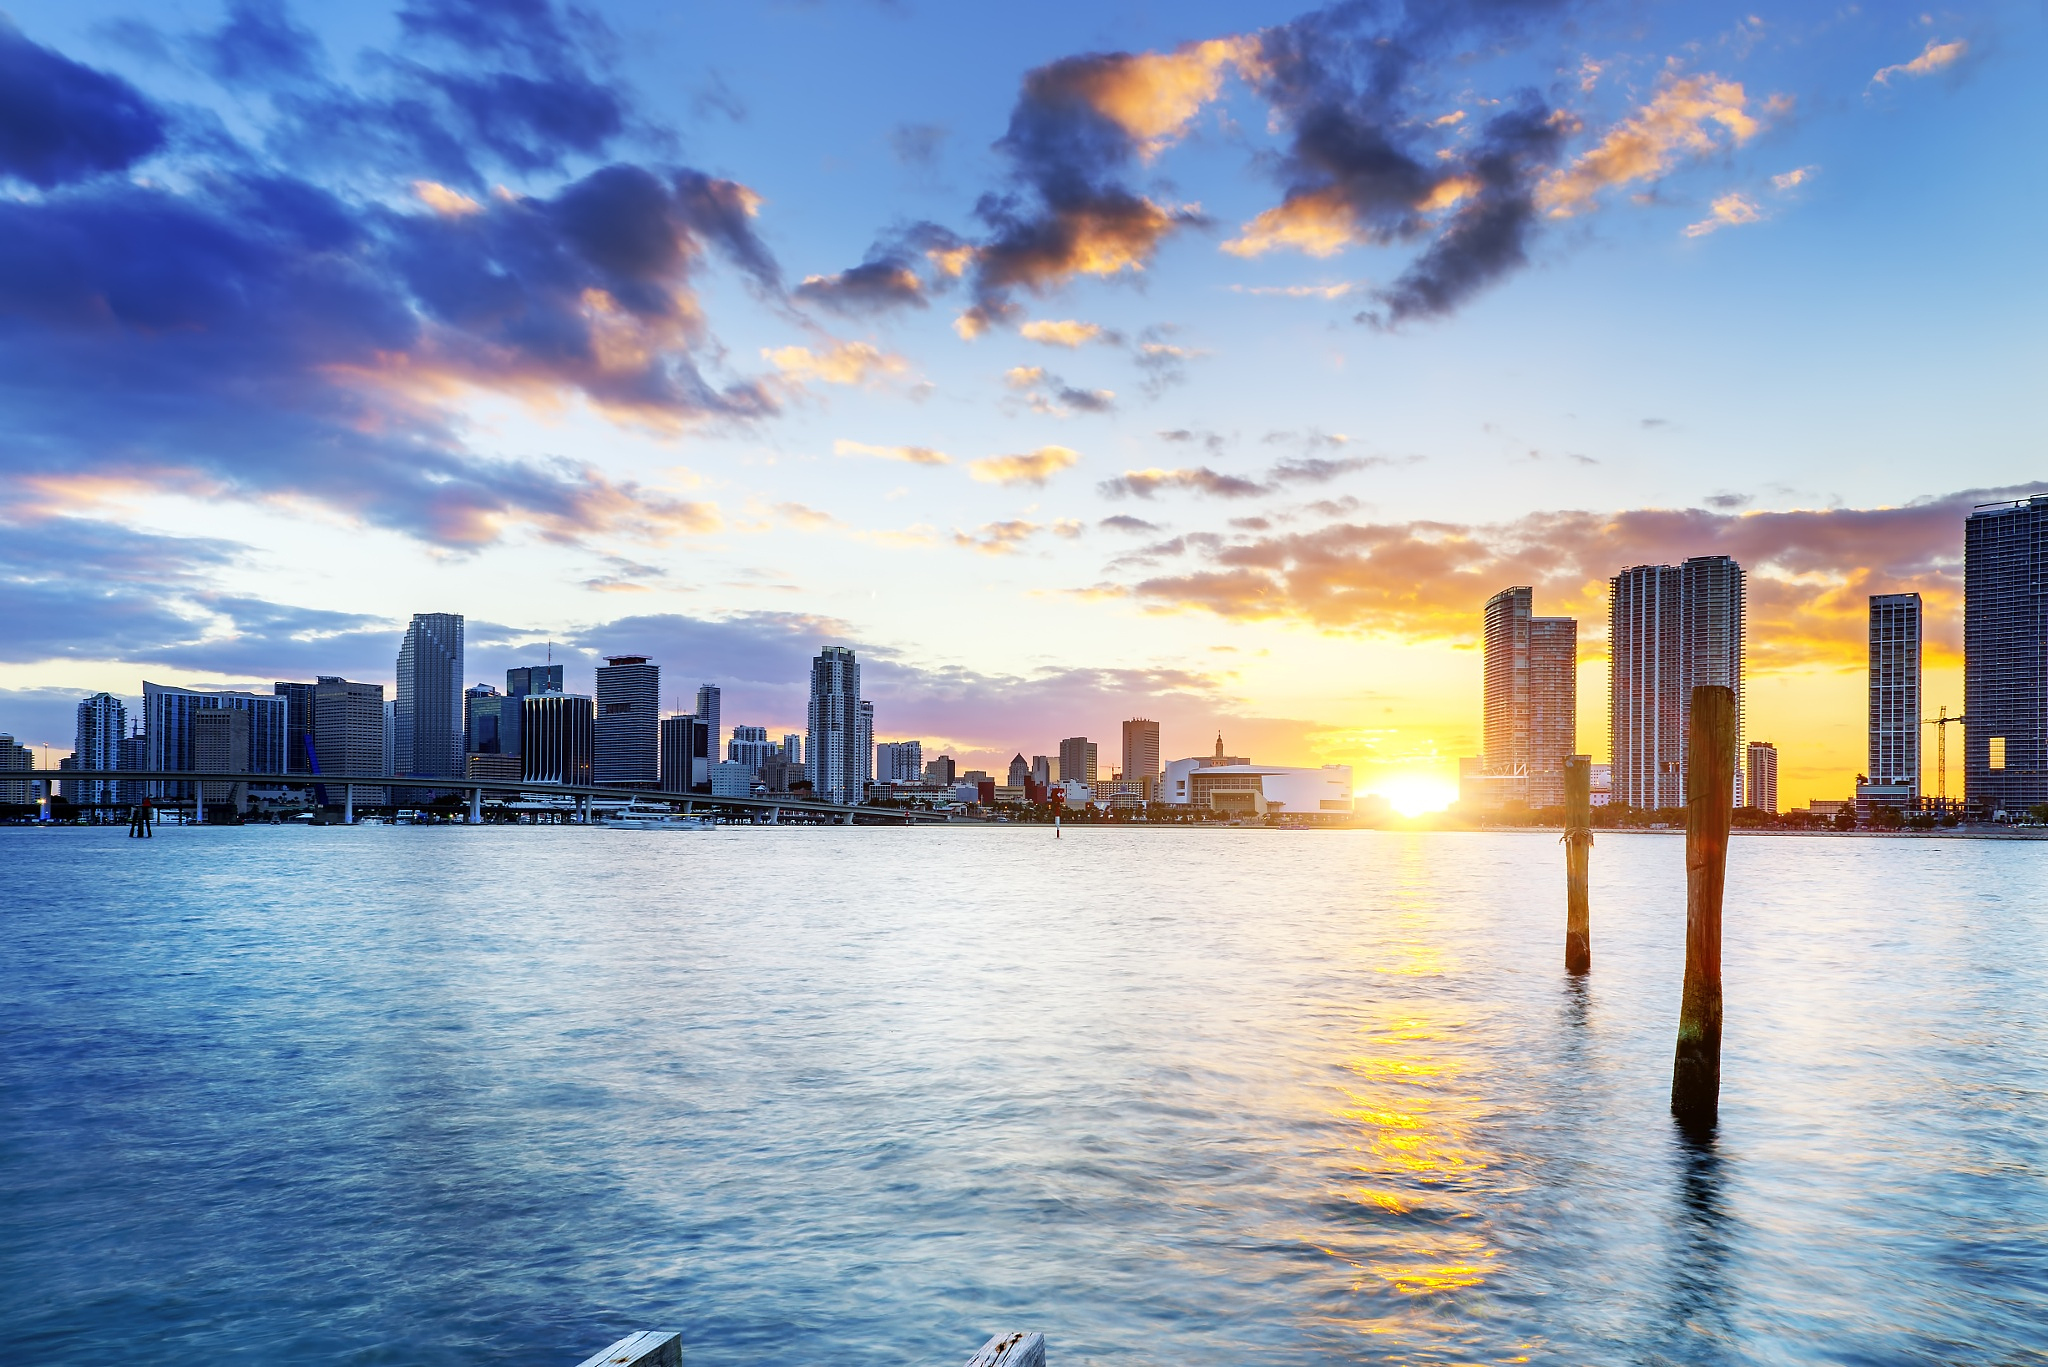 Free download wallpaper Cities, Sunset, Usa, City, Skyscraper, Building, Miami, Florida, Man Made on your PC desktop